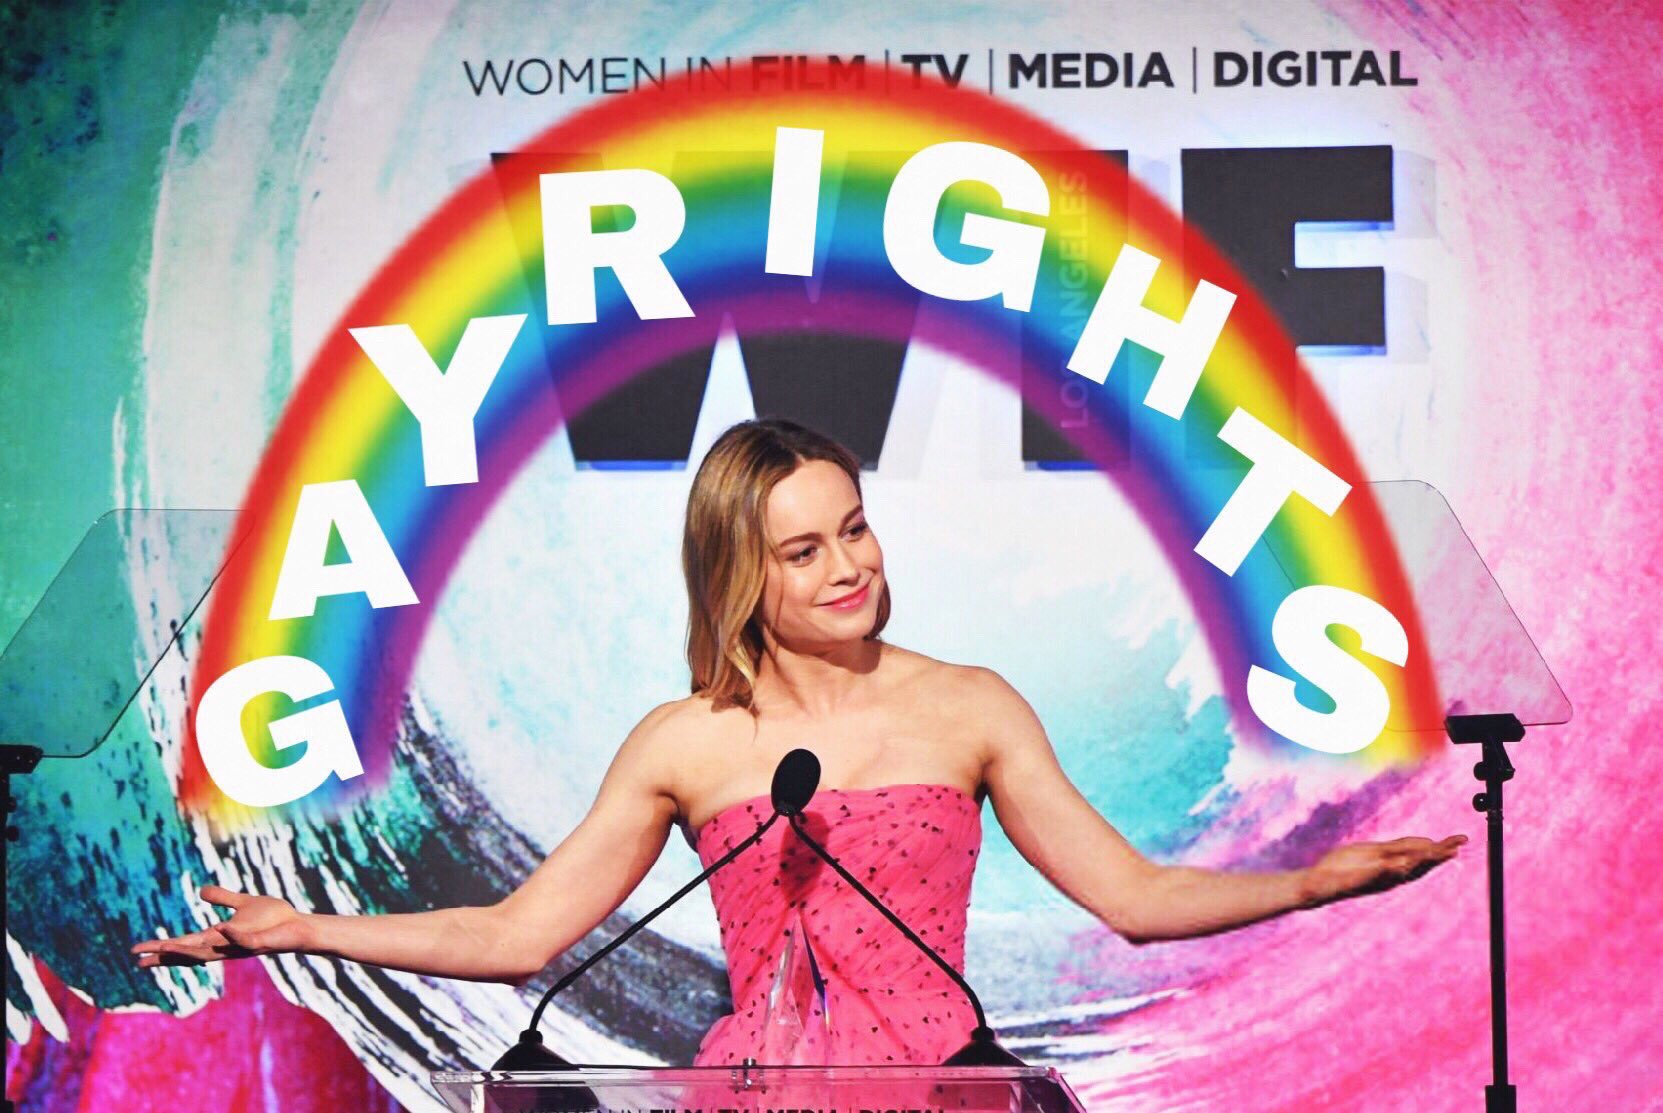 HAPPY BIRTHDAY TO THE MOST ICONIC LEGEND ILYBL I LOVE YOU BRIE LARSON 